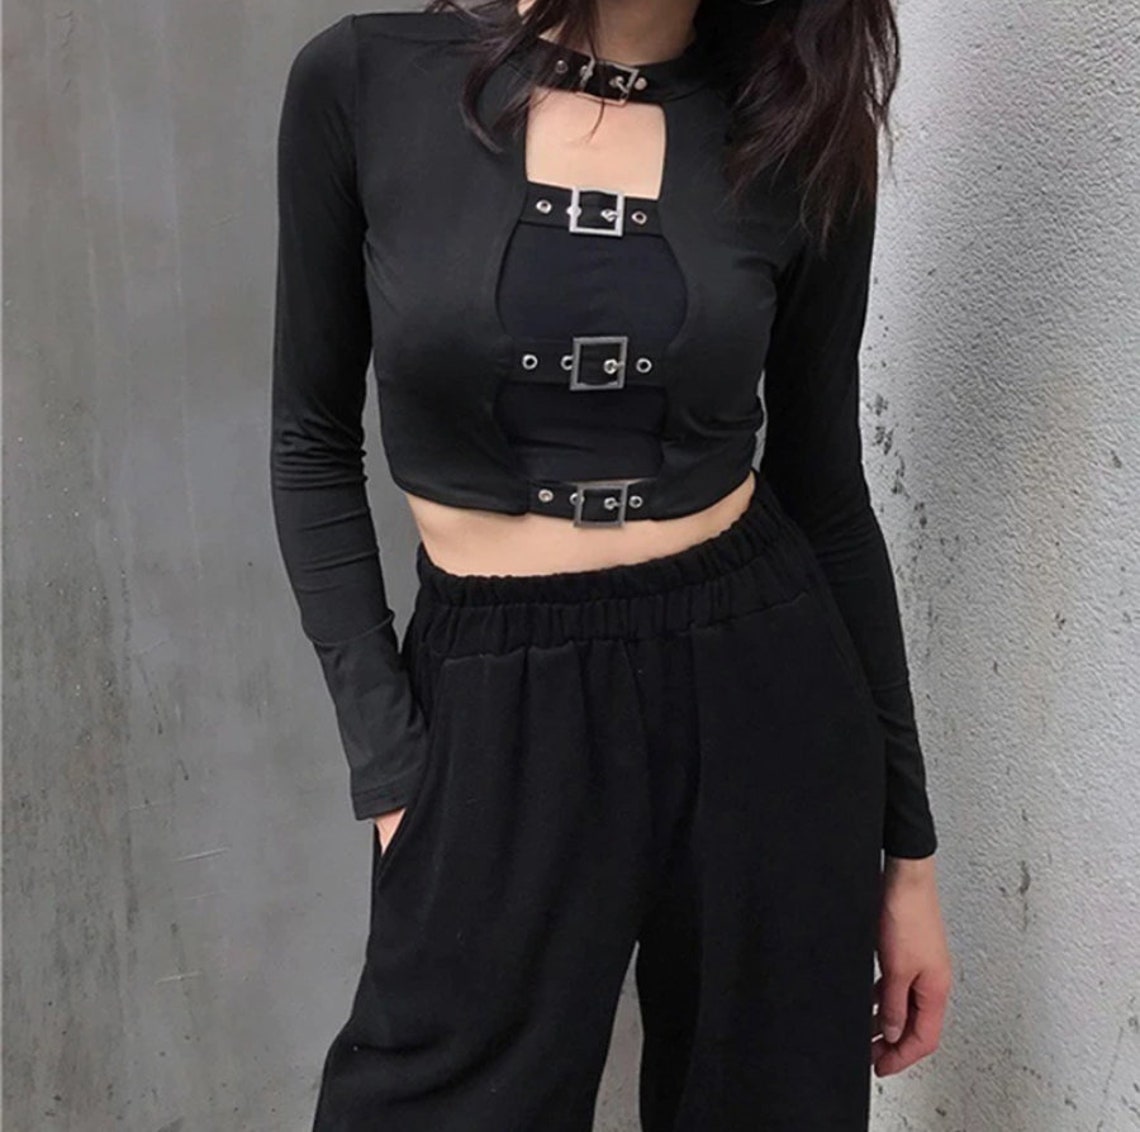 Buckle Long Sleeve Sexy Crop Top Style: Goth E-girl Emo | Etsy